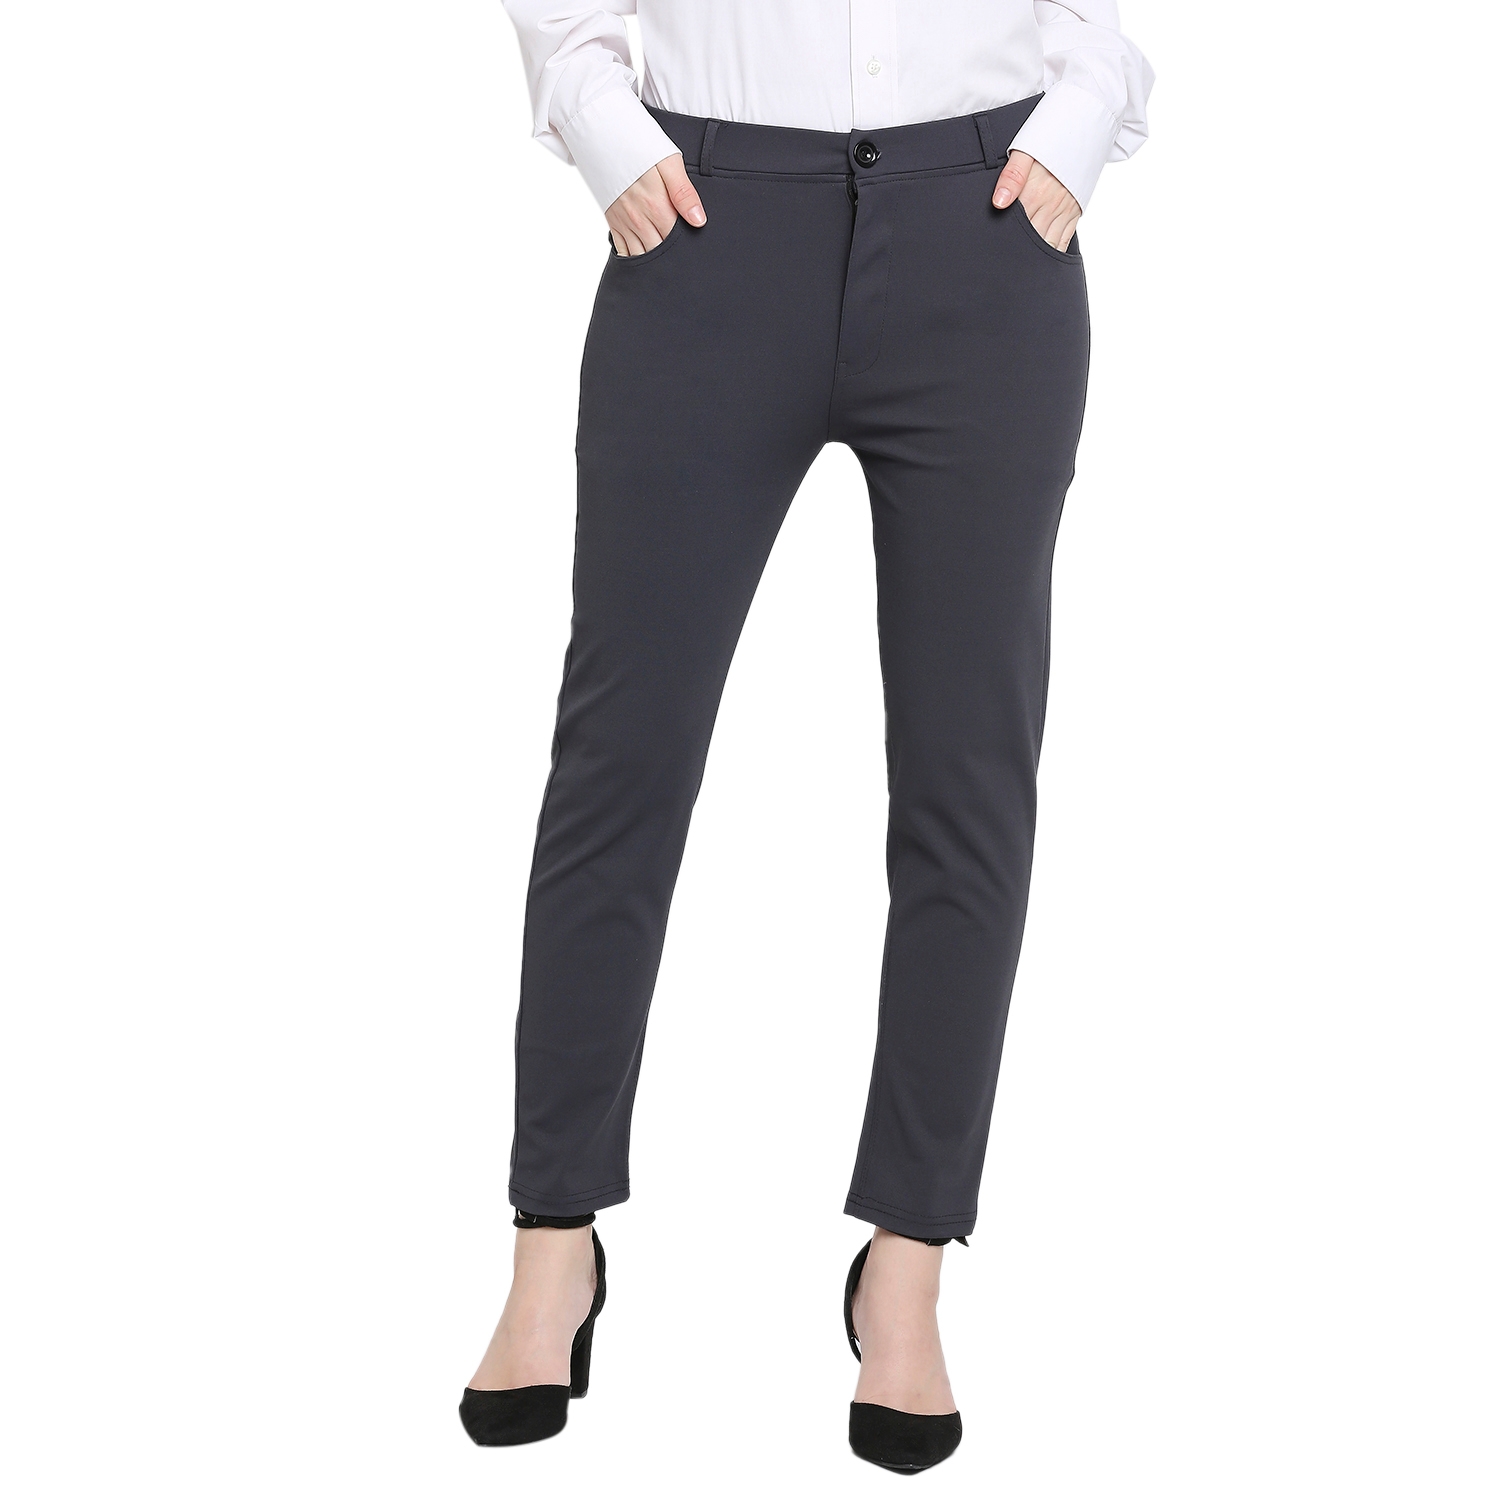 Buy Regular Trouser Pants White Gray and Beige Combo of 3 Cotton for Best  Price Reviews Free Shipping